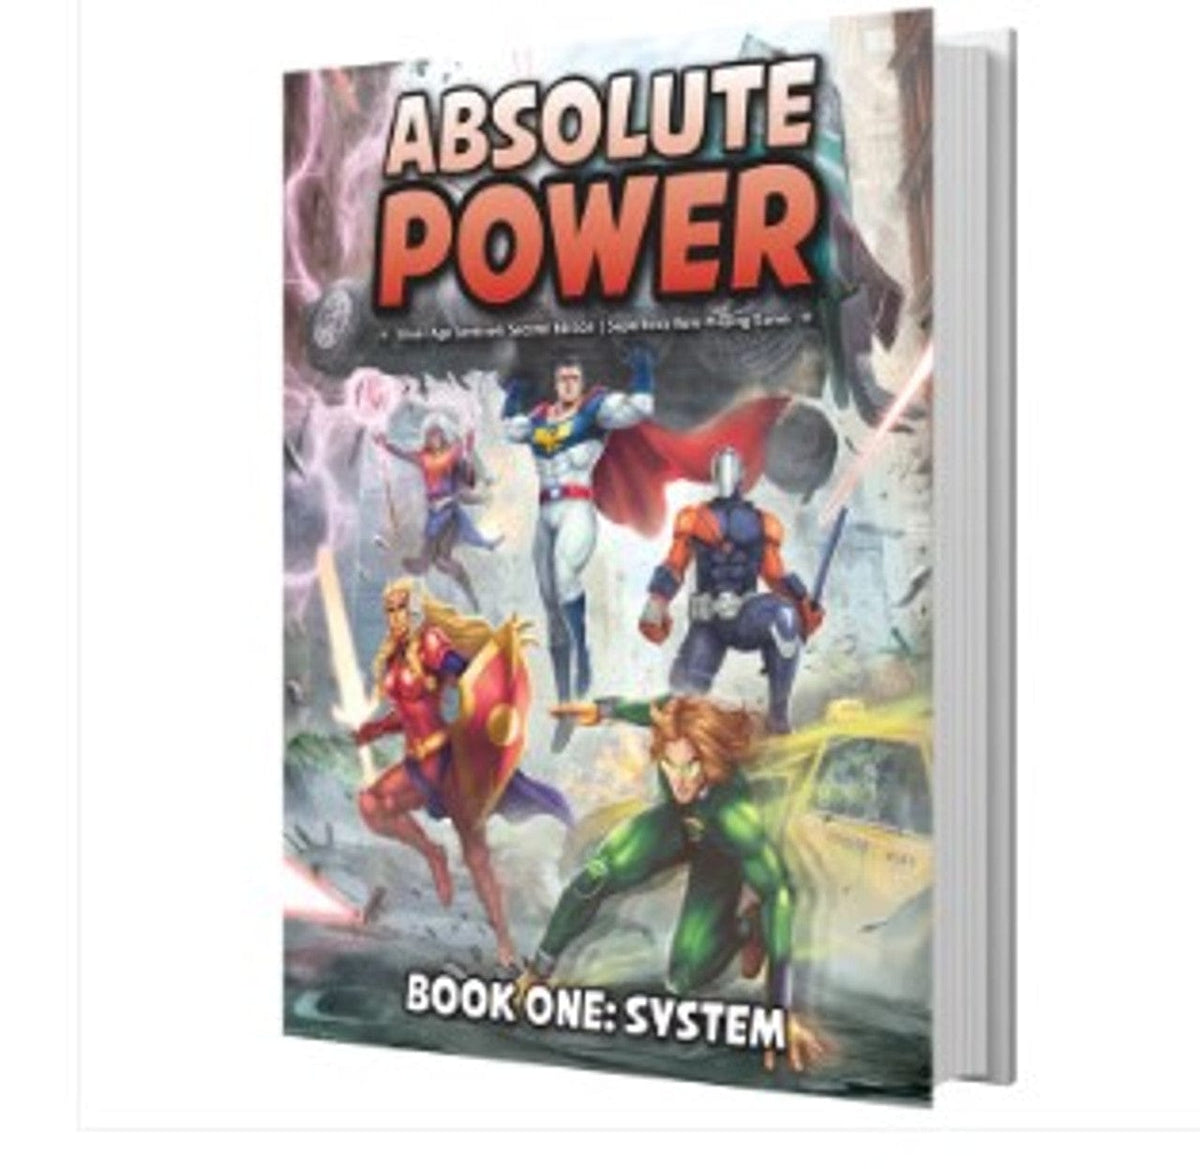 Absolute Power: Book One - System - Third Eye